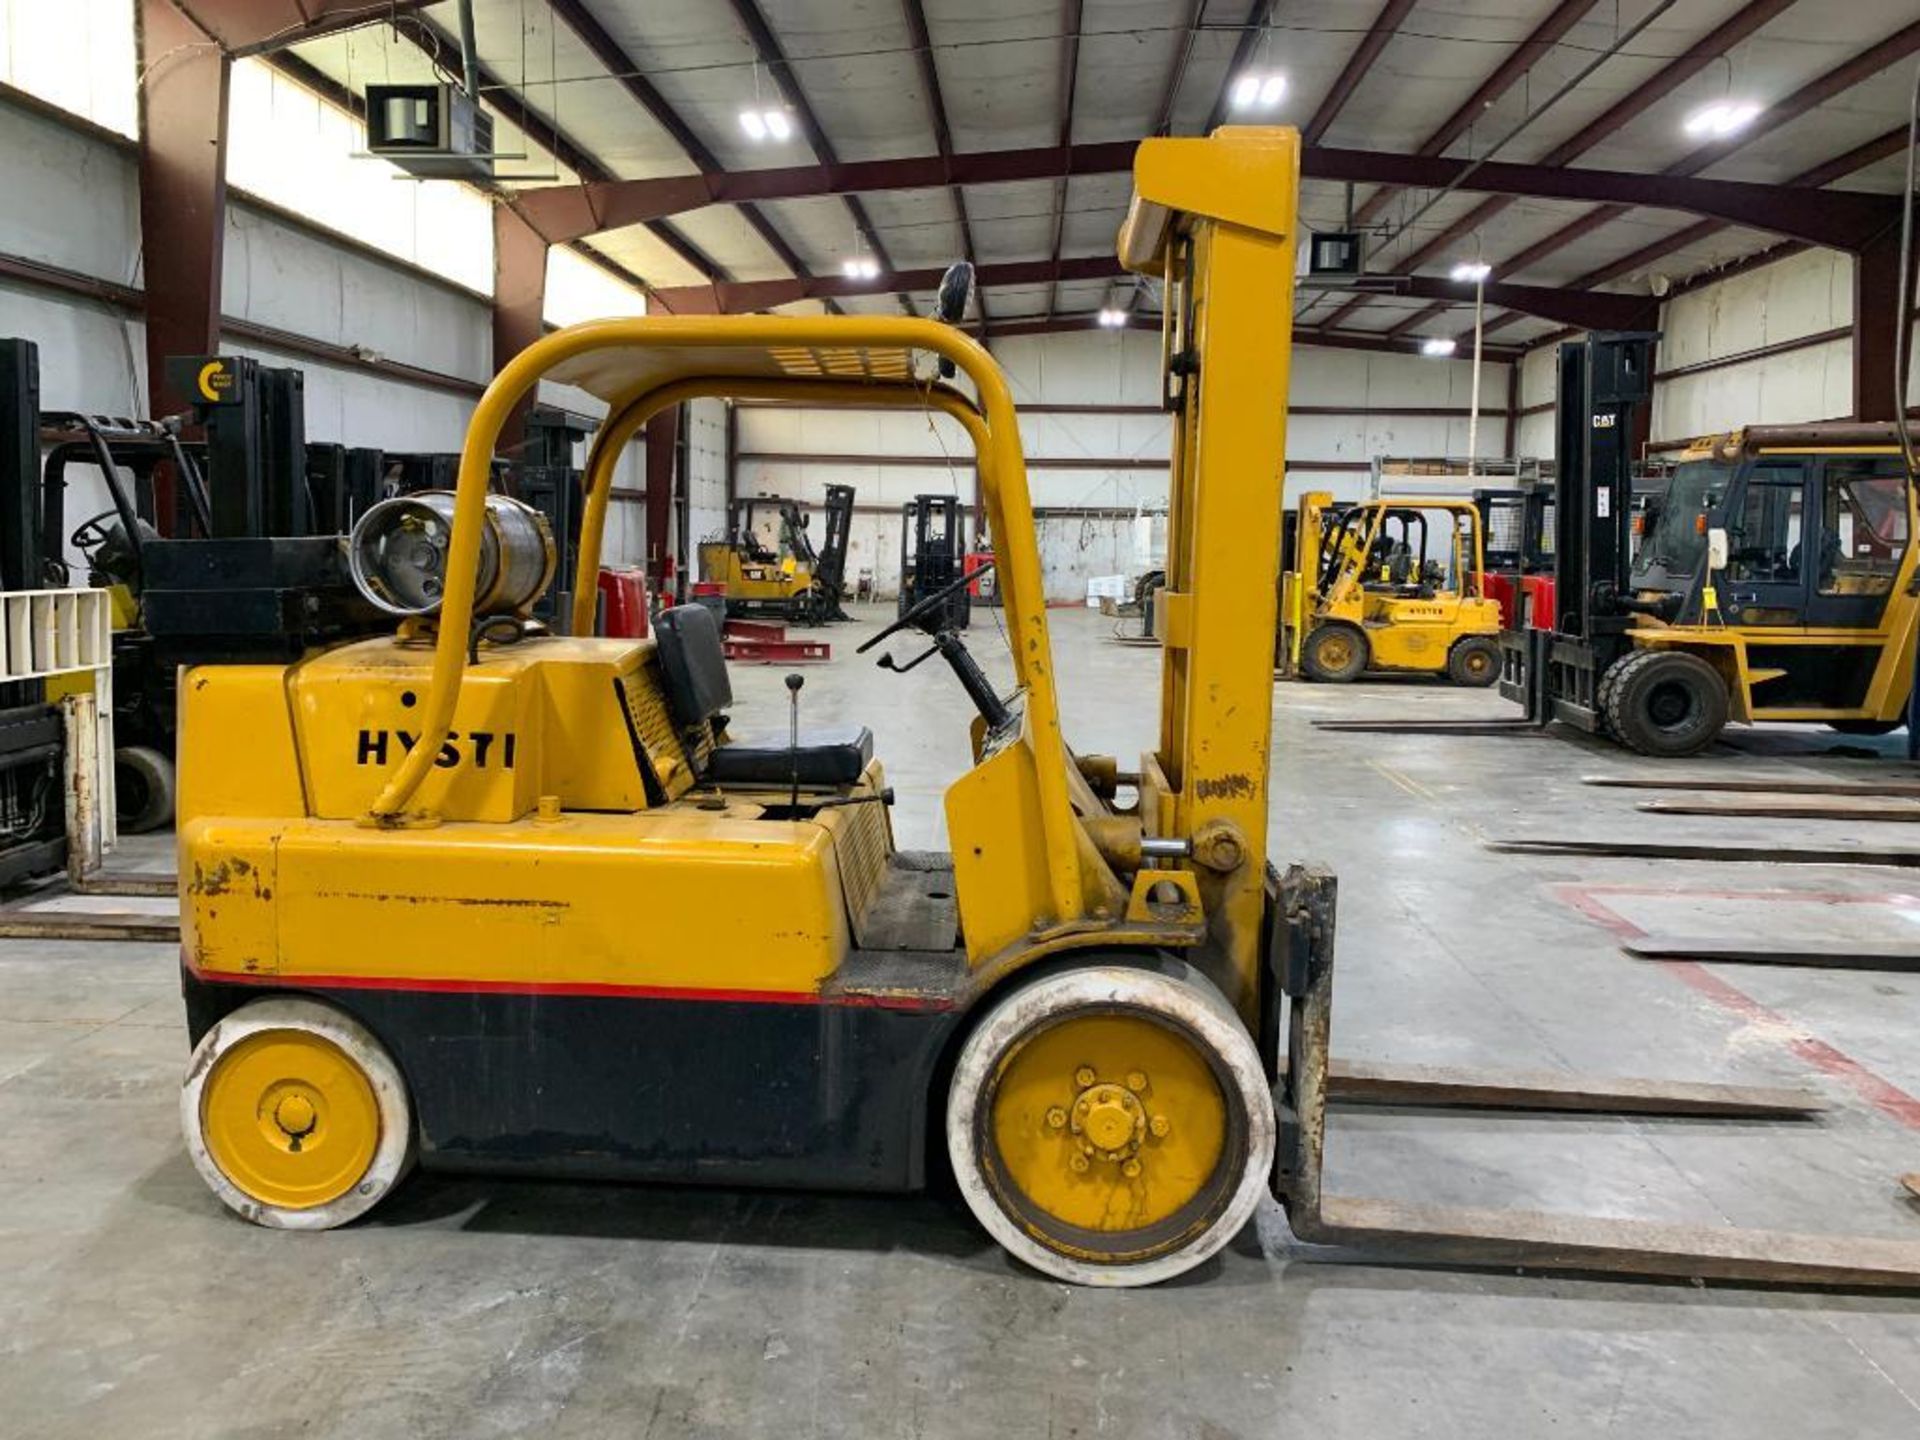 Hyster 15,000 lb. capacity forklift, model s150a, s/n a24d1707n, lpg, 3-speed manual transmission, s - Image 3 of 5